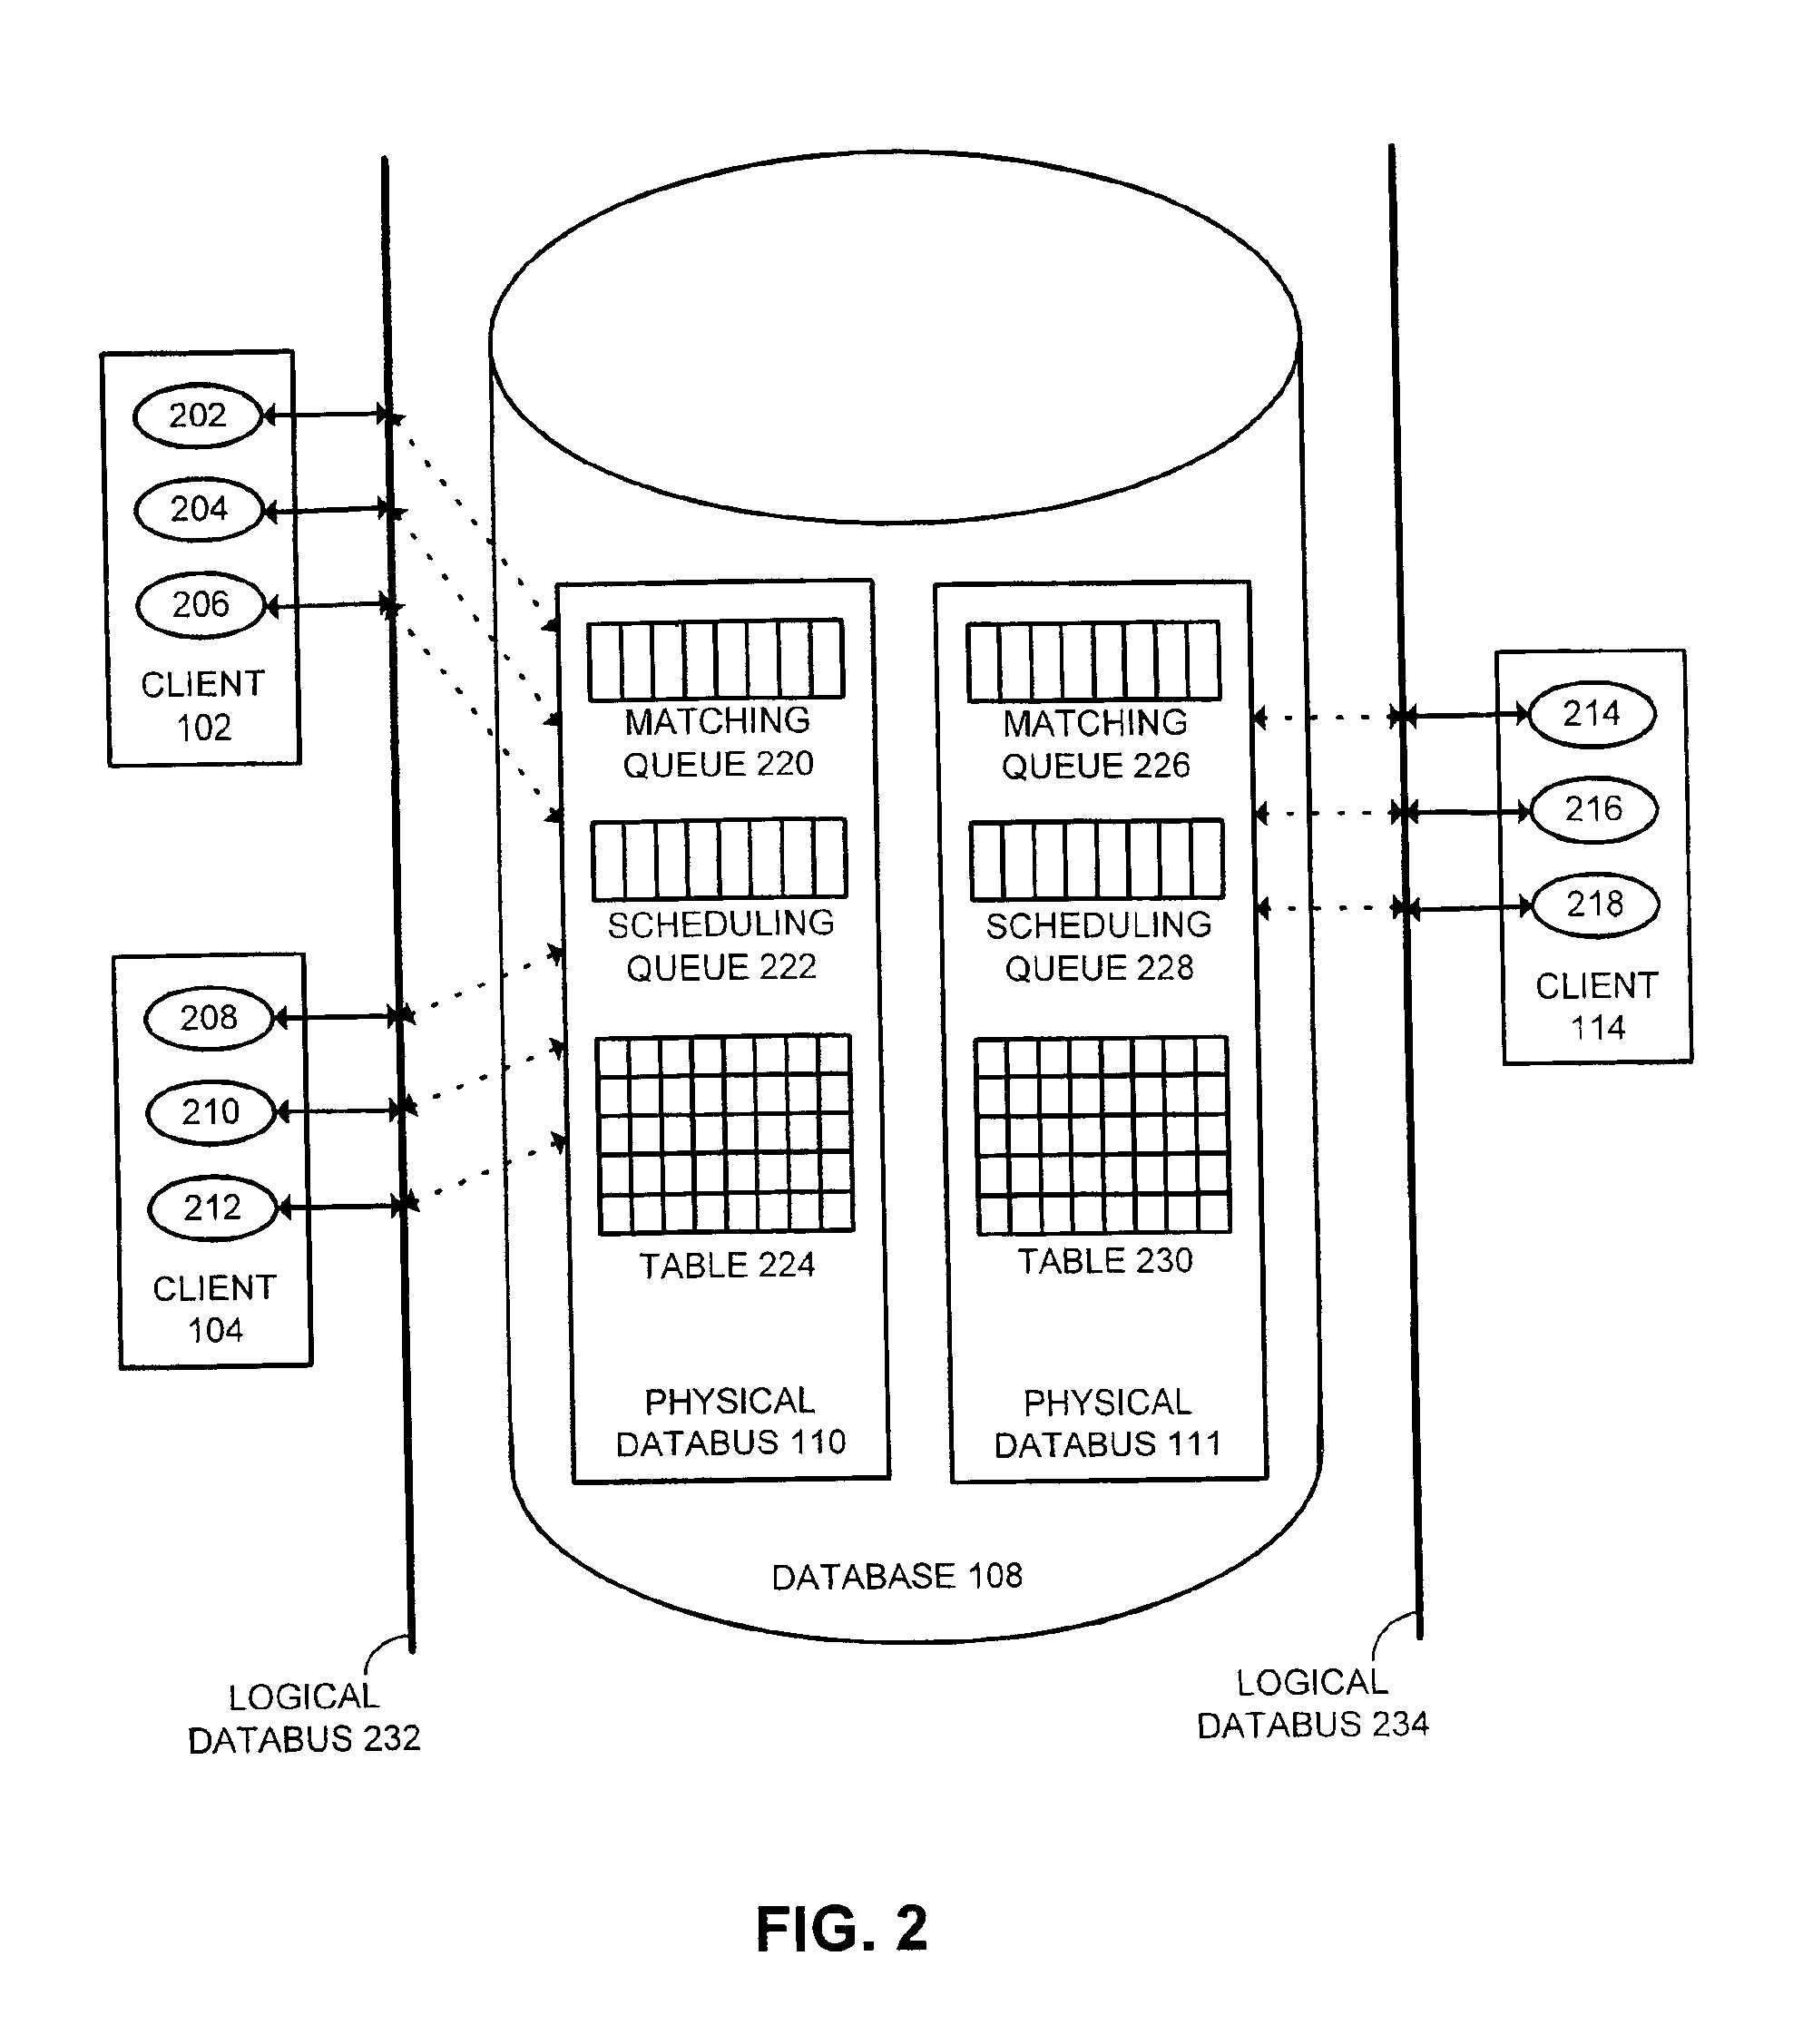 Method and apparatus to facilitate interaction management between loosely coupled applications